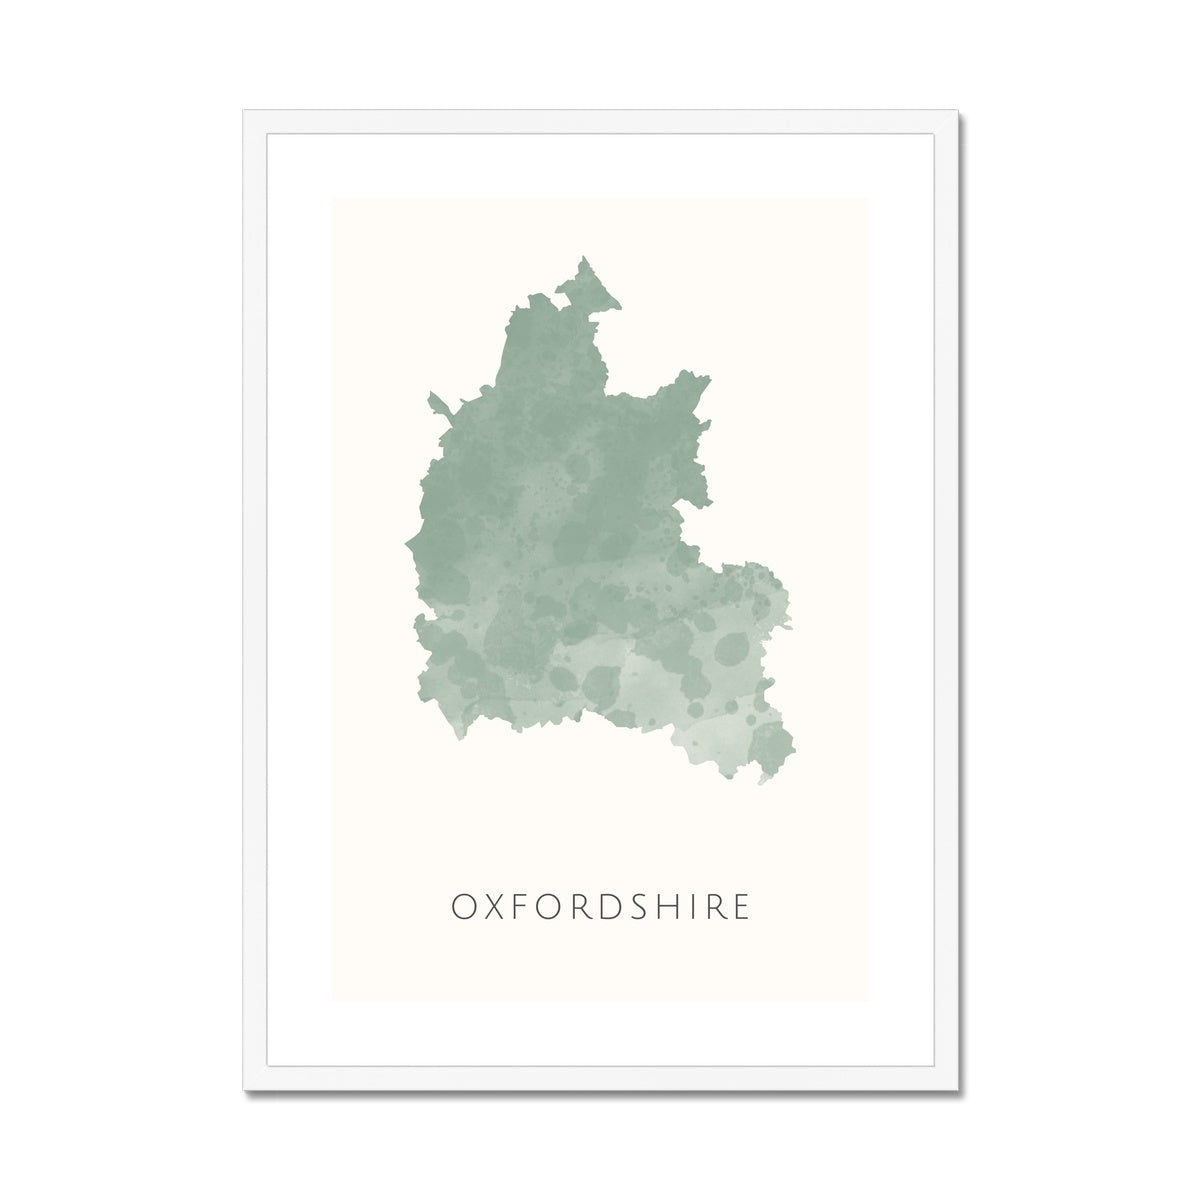 Oxfordshire -  Framed & Mounted Map